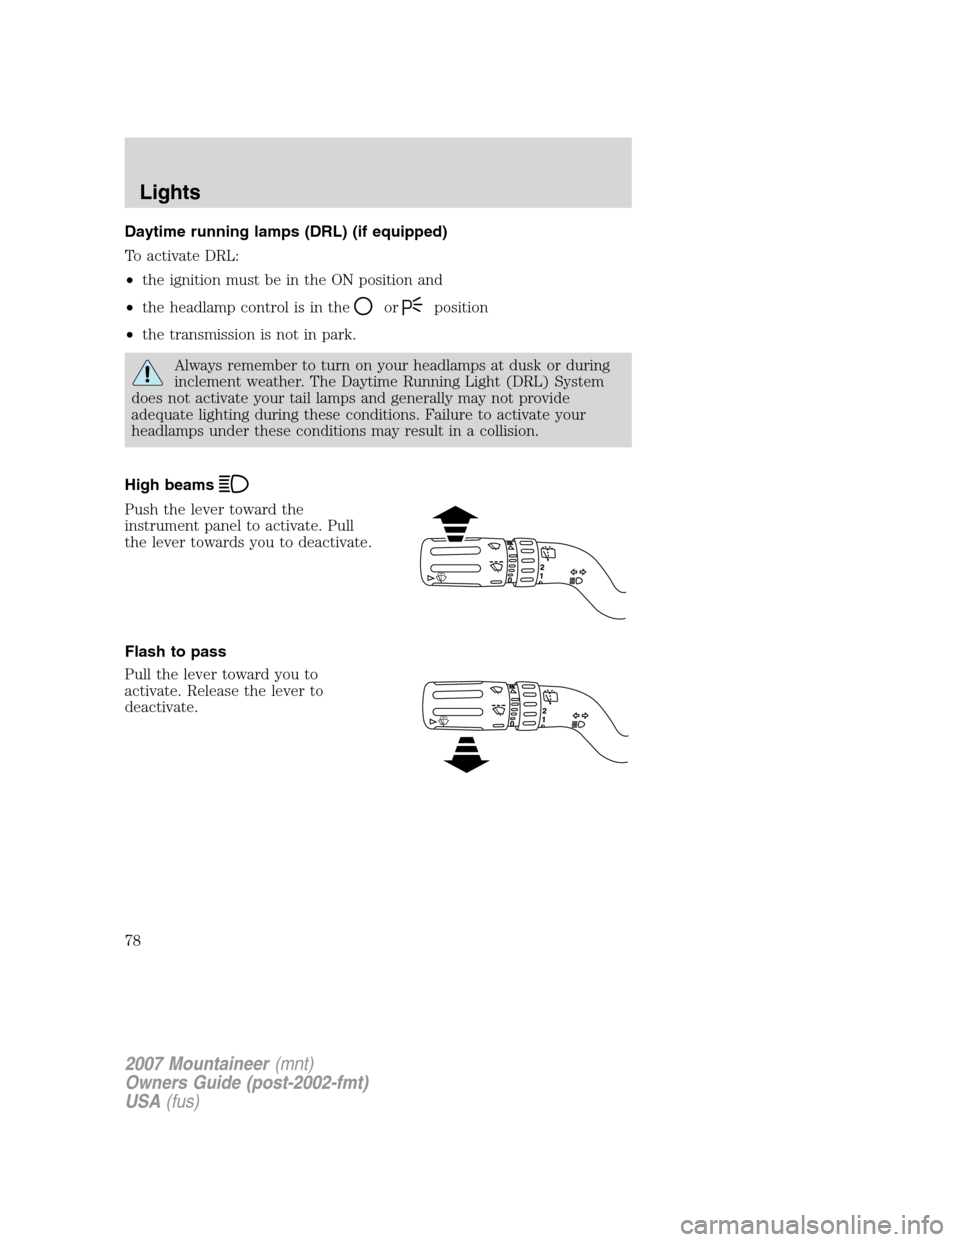 Mercury Mountaineer 2007  Owners Manuals Daytime running lamps (DRL) (if equipped)
To activate DRL:
•the ignition must be in the ON position and
•the headlamp control is in the
orposition
•the transmission is not in park.
Always rememb